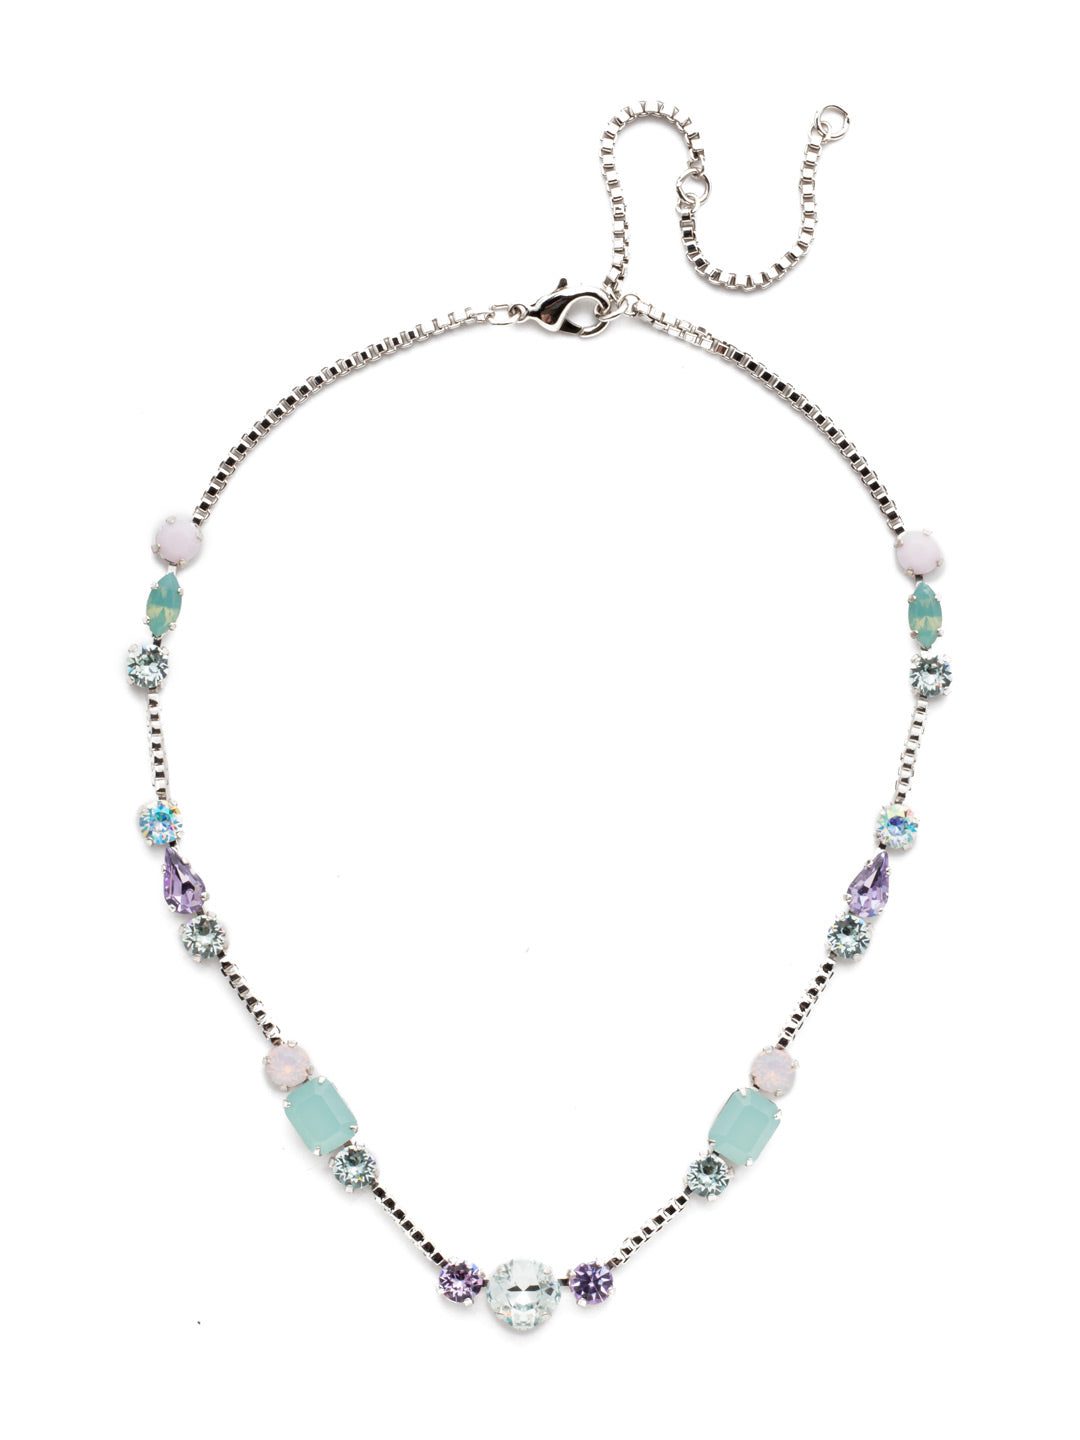 Poppy Tennis Necklace - NEN18RHTUL - <p>The Poppy Tennis Necklace is anything but ordinary. Wear it all when you combine classic, baguette and navette sparklers. It's structured and sophisticated. From Sorrelli's Tulip collection in our Palladium Silver-tone finish.</p>